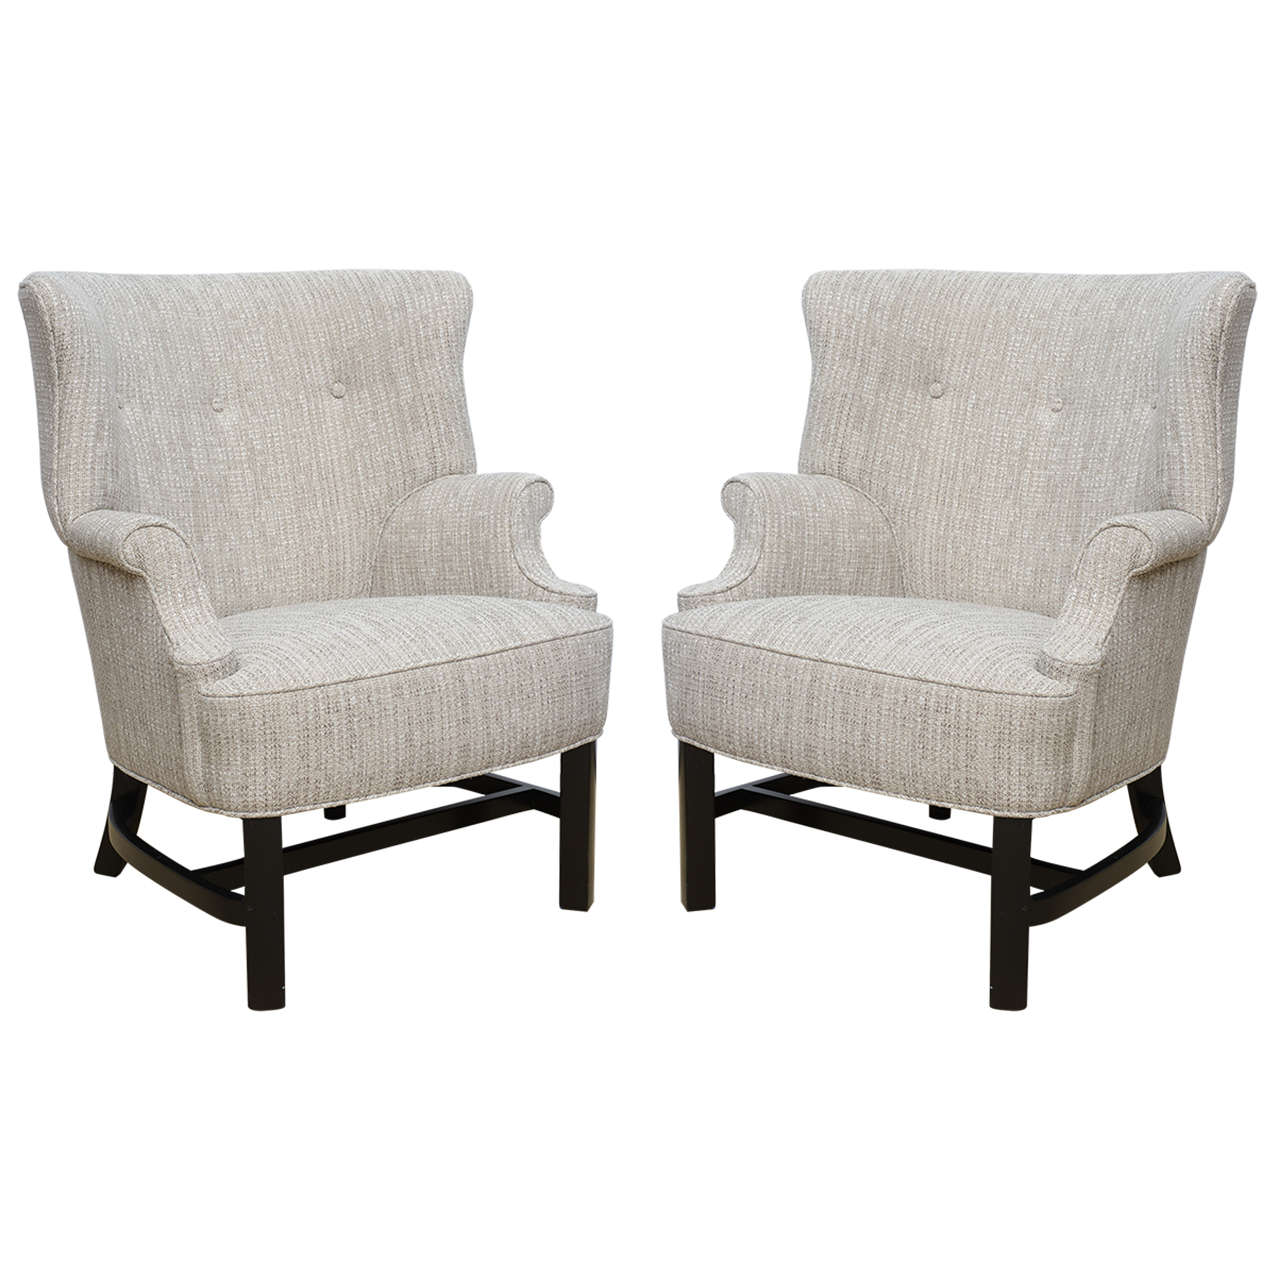 Pair of Mid-Century Modern Petite Scale 1940s Dunbar Attributed Wingback Chairs